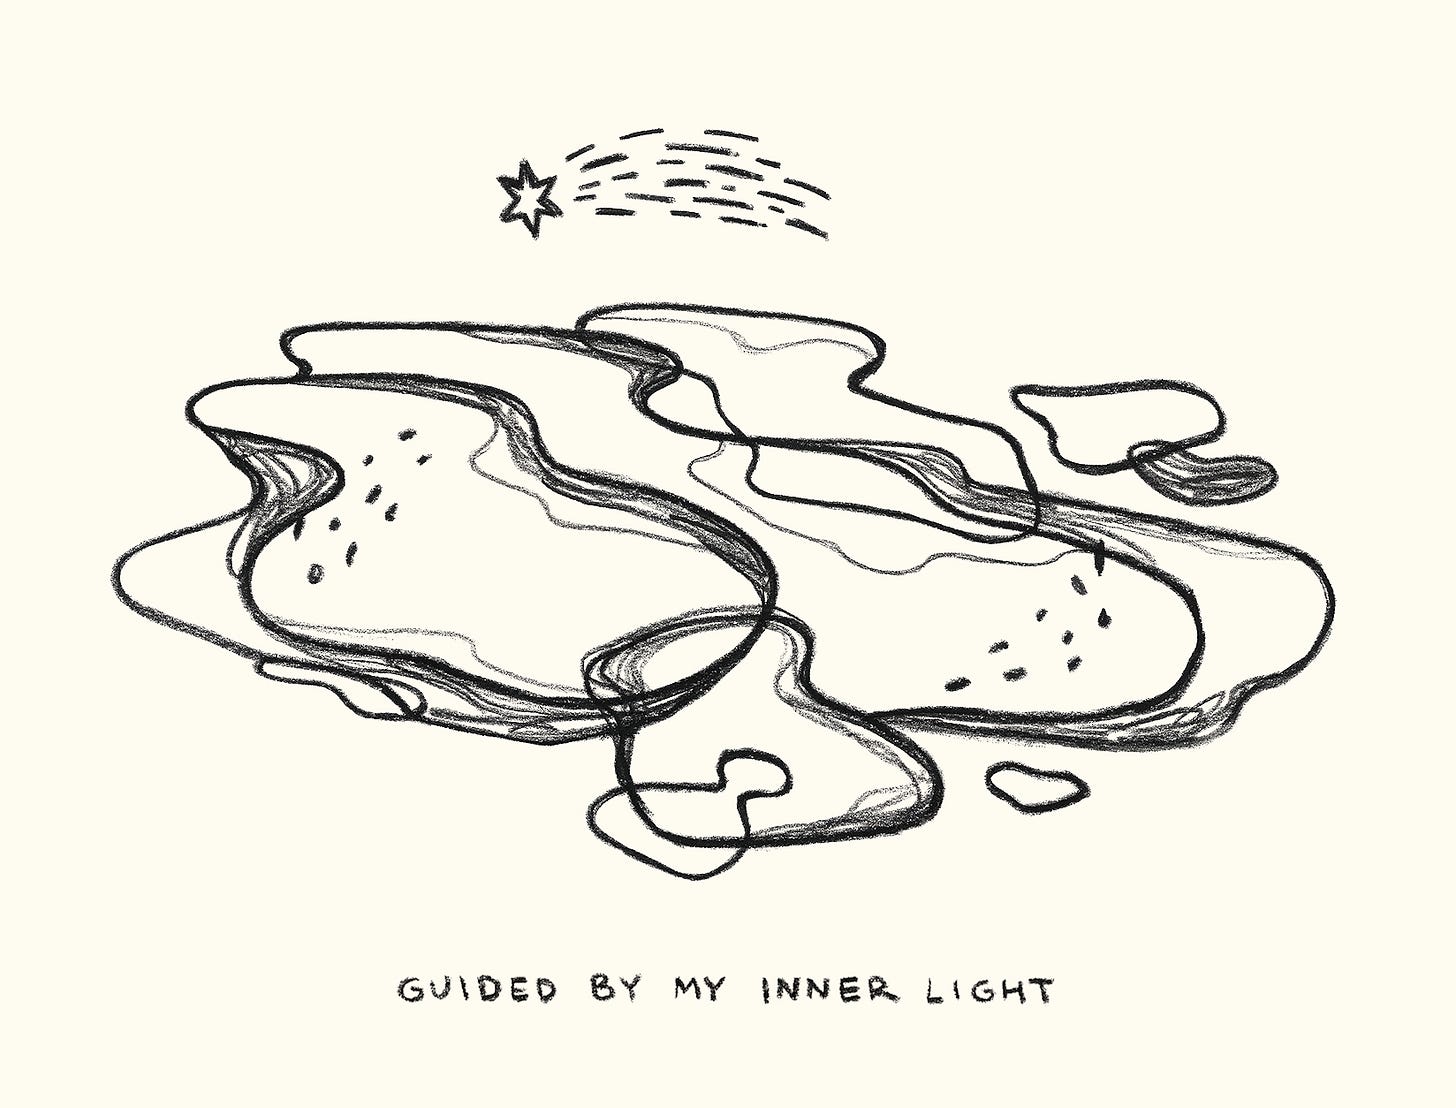 Black and white illustration of a stream of water and a shooting star above. The text at the bottom reads: "Guided by my inner light"